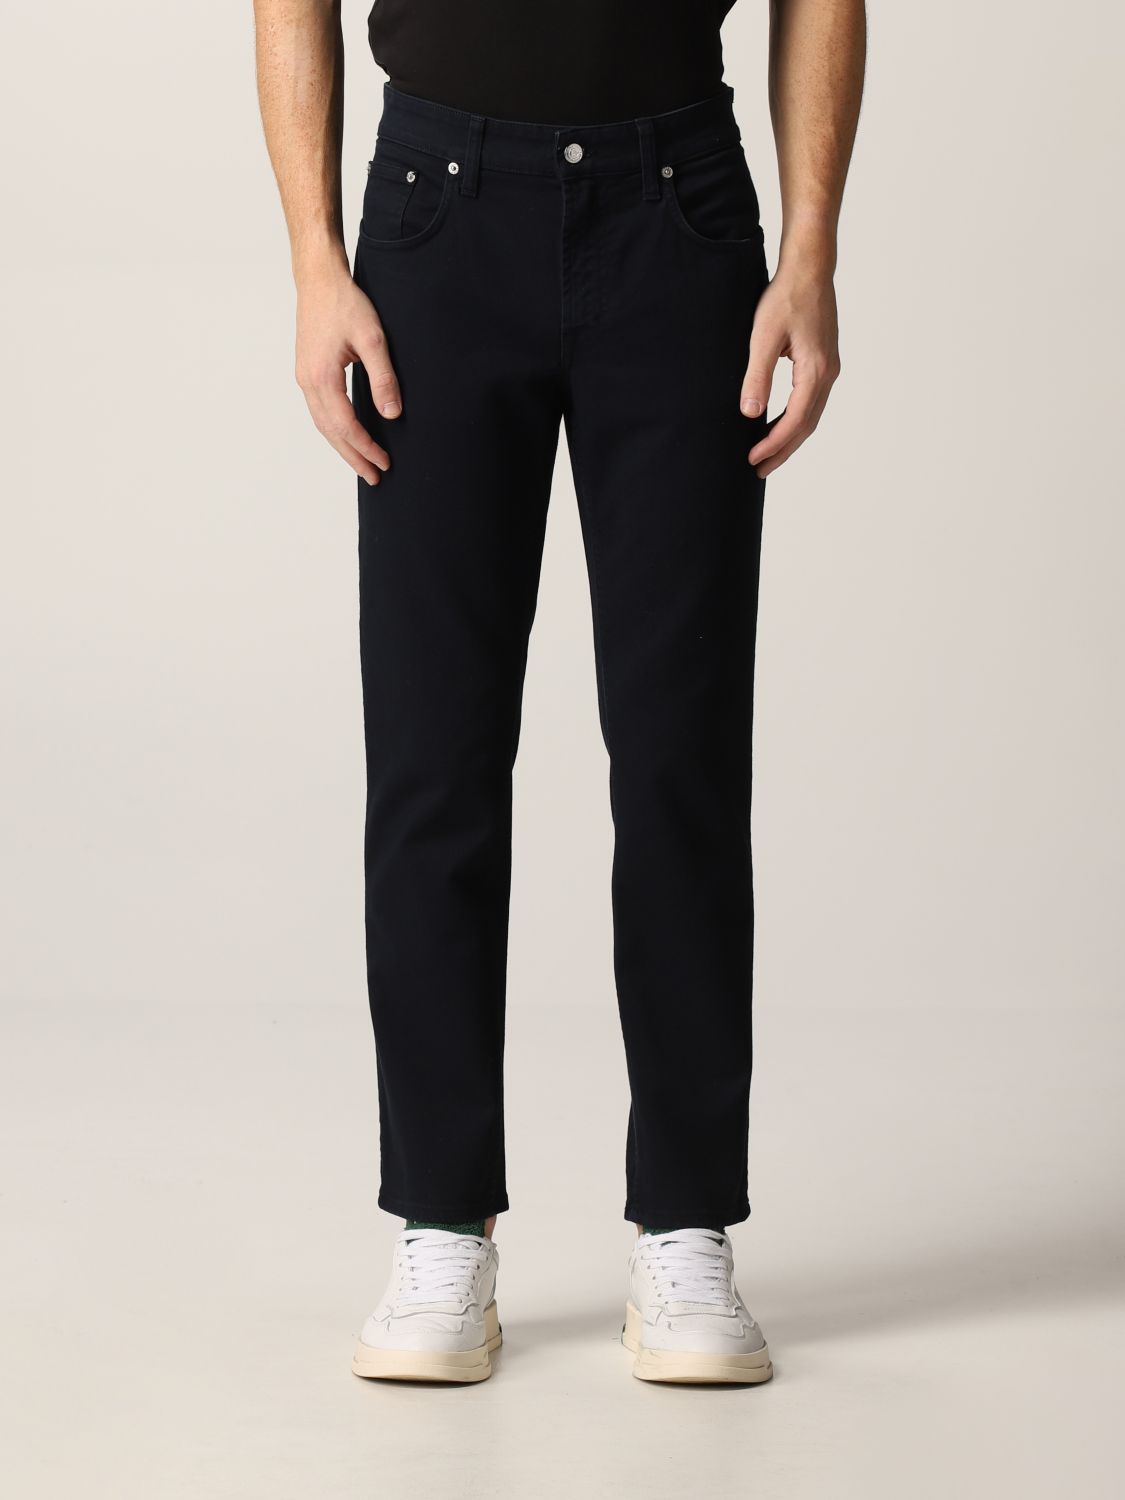 DEPARTMENT 5: pants for man - Navy | Department 5 pants UP5121DS0001 ...